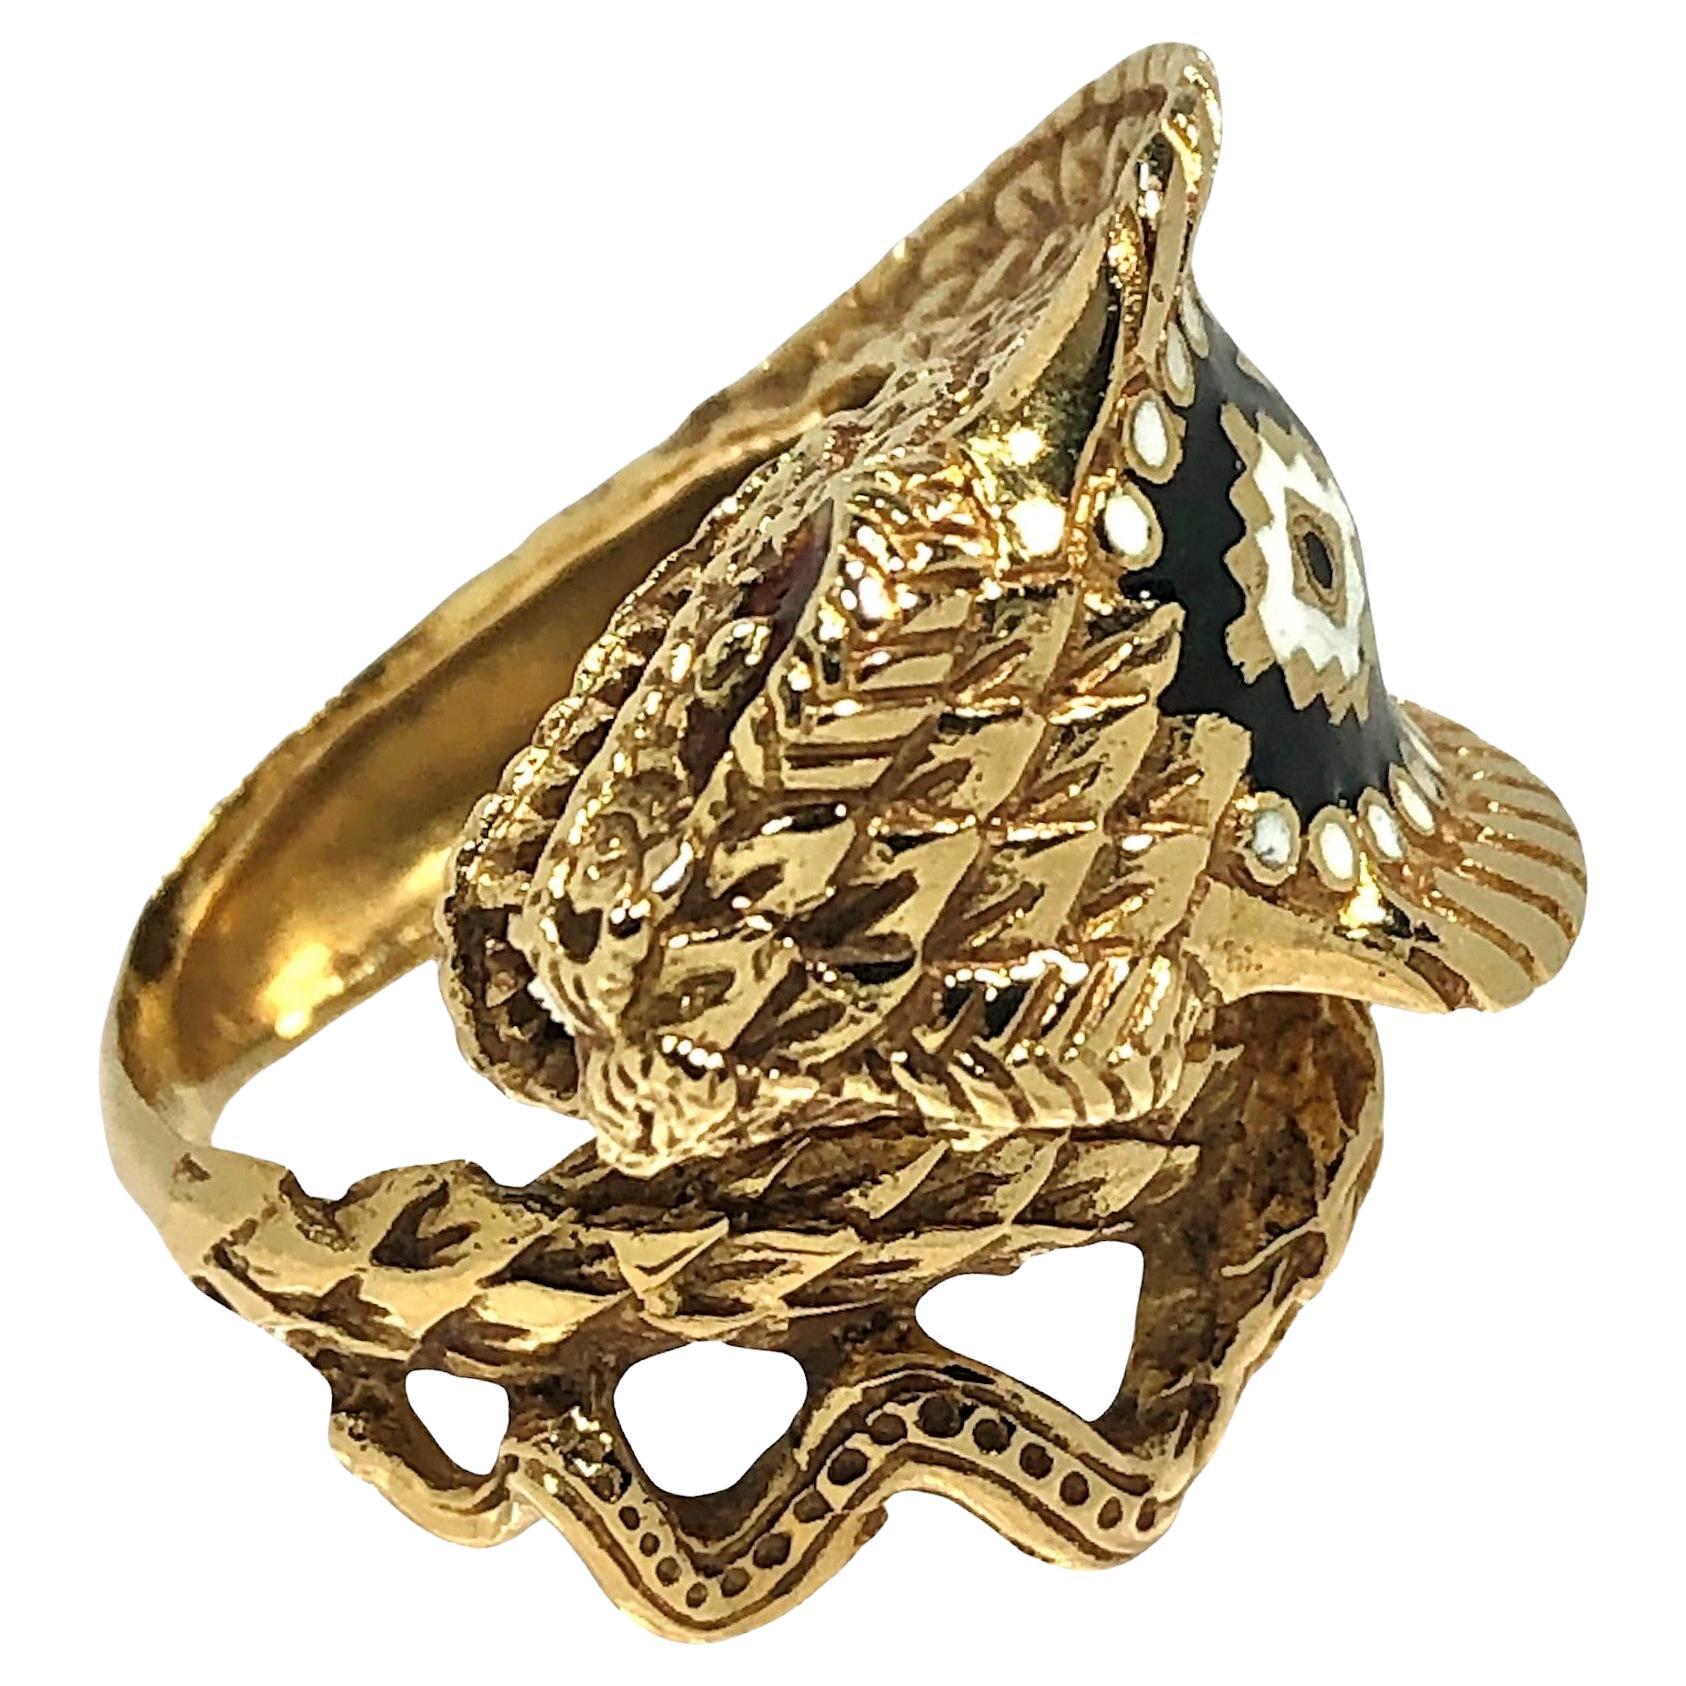 This authentic and menacing looking cobra ring is crafted in 18k yellow gold, and is replete over it's entire surface with total attention to detail, and  is accented with black, white and cranberry color enamel. Measures 3/4 inches in width by a 